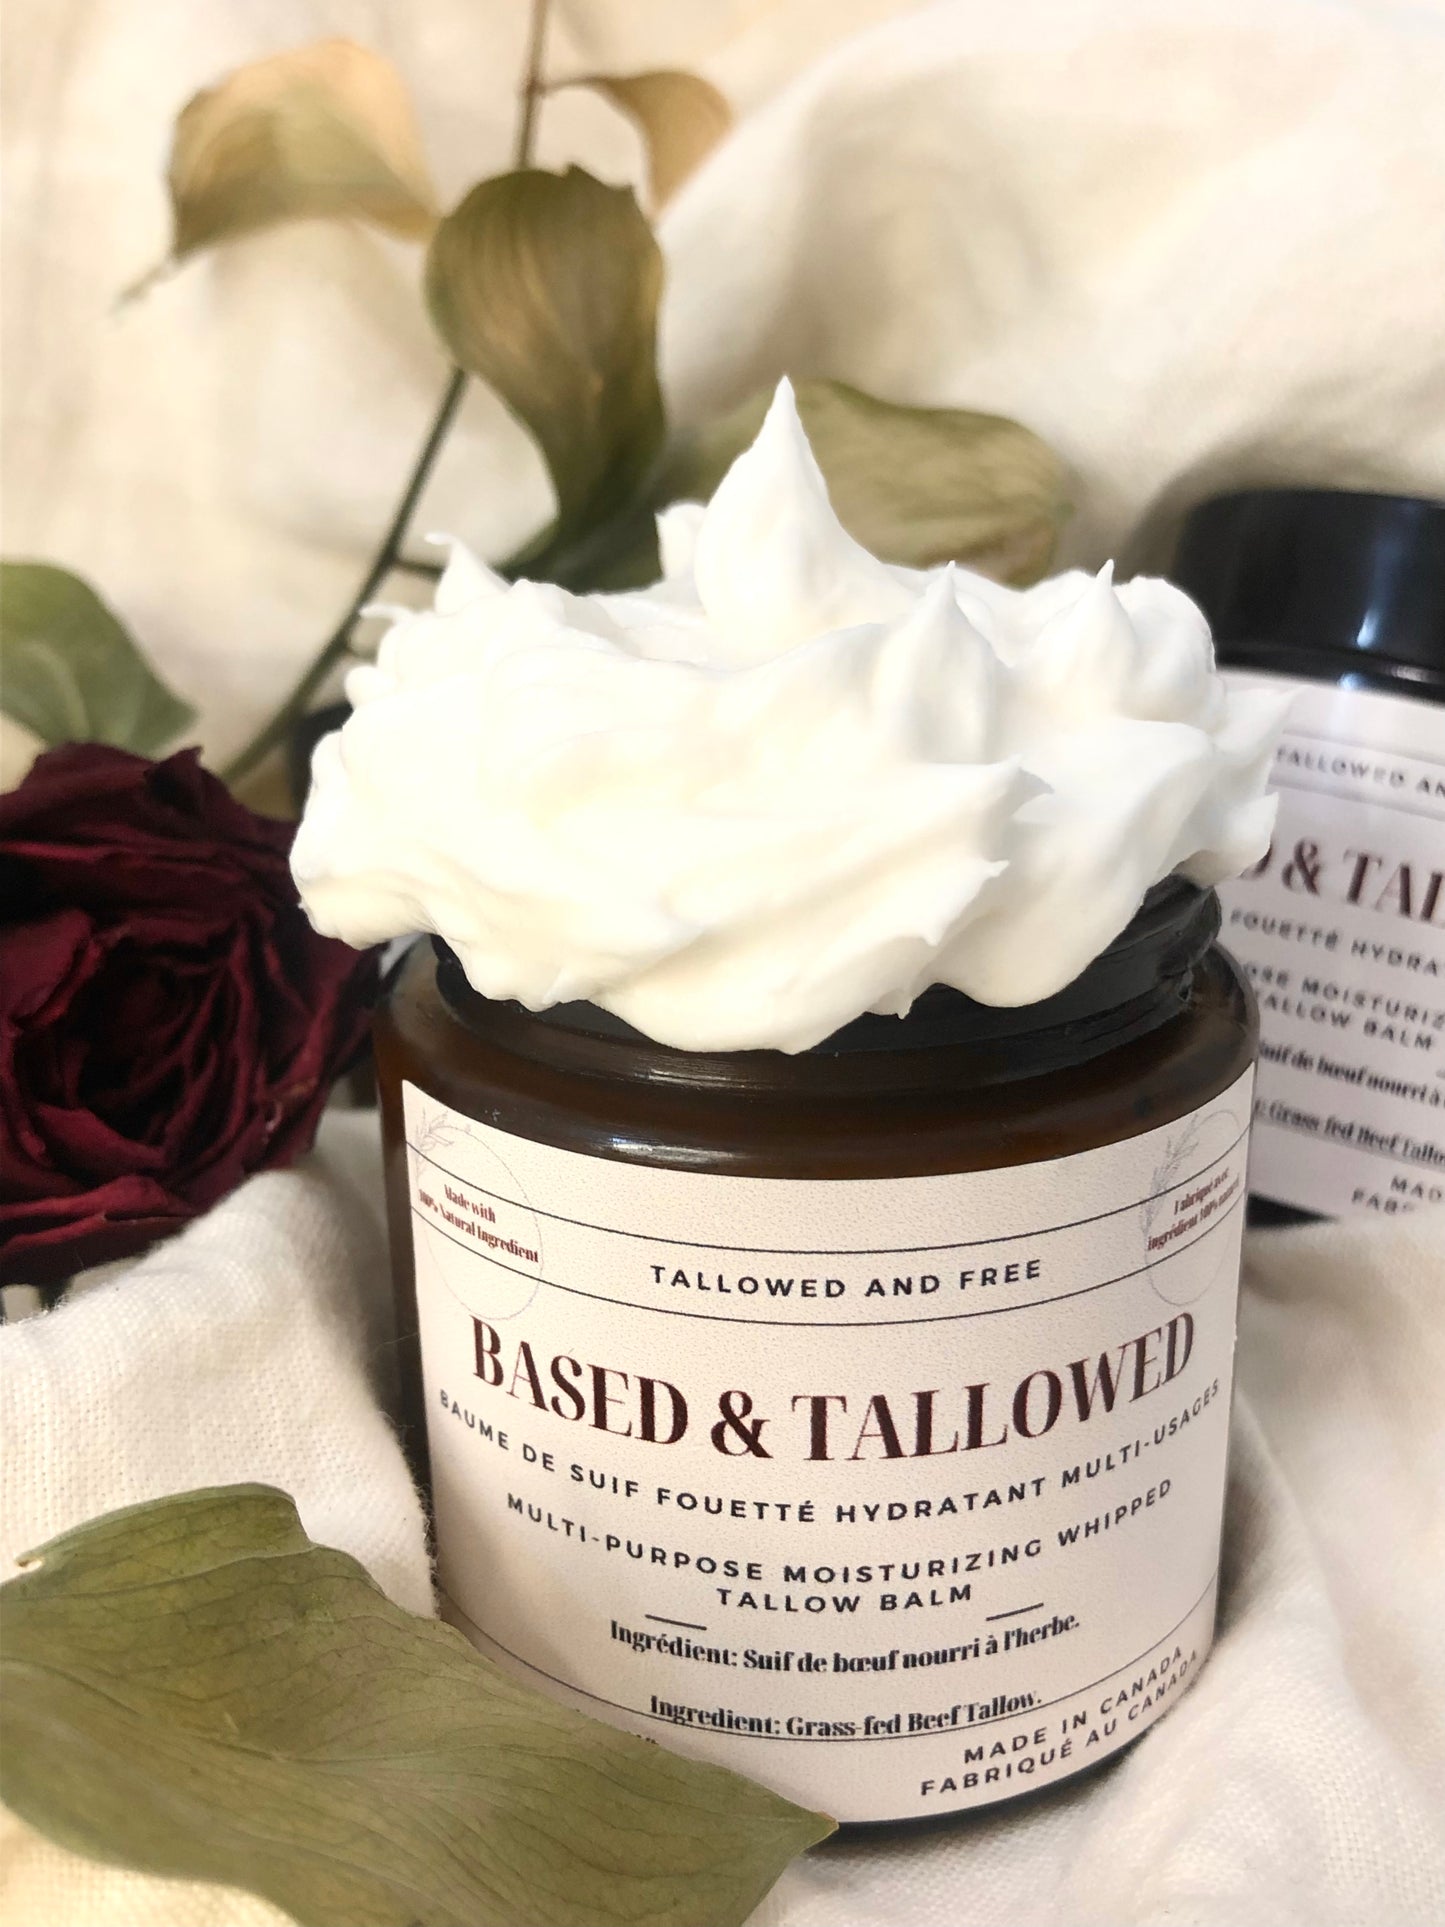 Based & Tallowed: Unscented Grass-Fed Beef Tallow - Whipped and Solid Options (Anti-ageing and ideal for Acne-Prone, Dry, Itchy, Baby, and Sensitive Skin.) - 100 ml